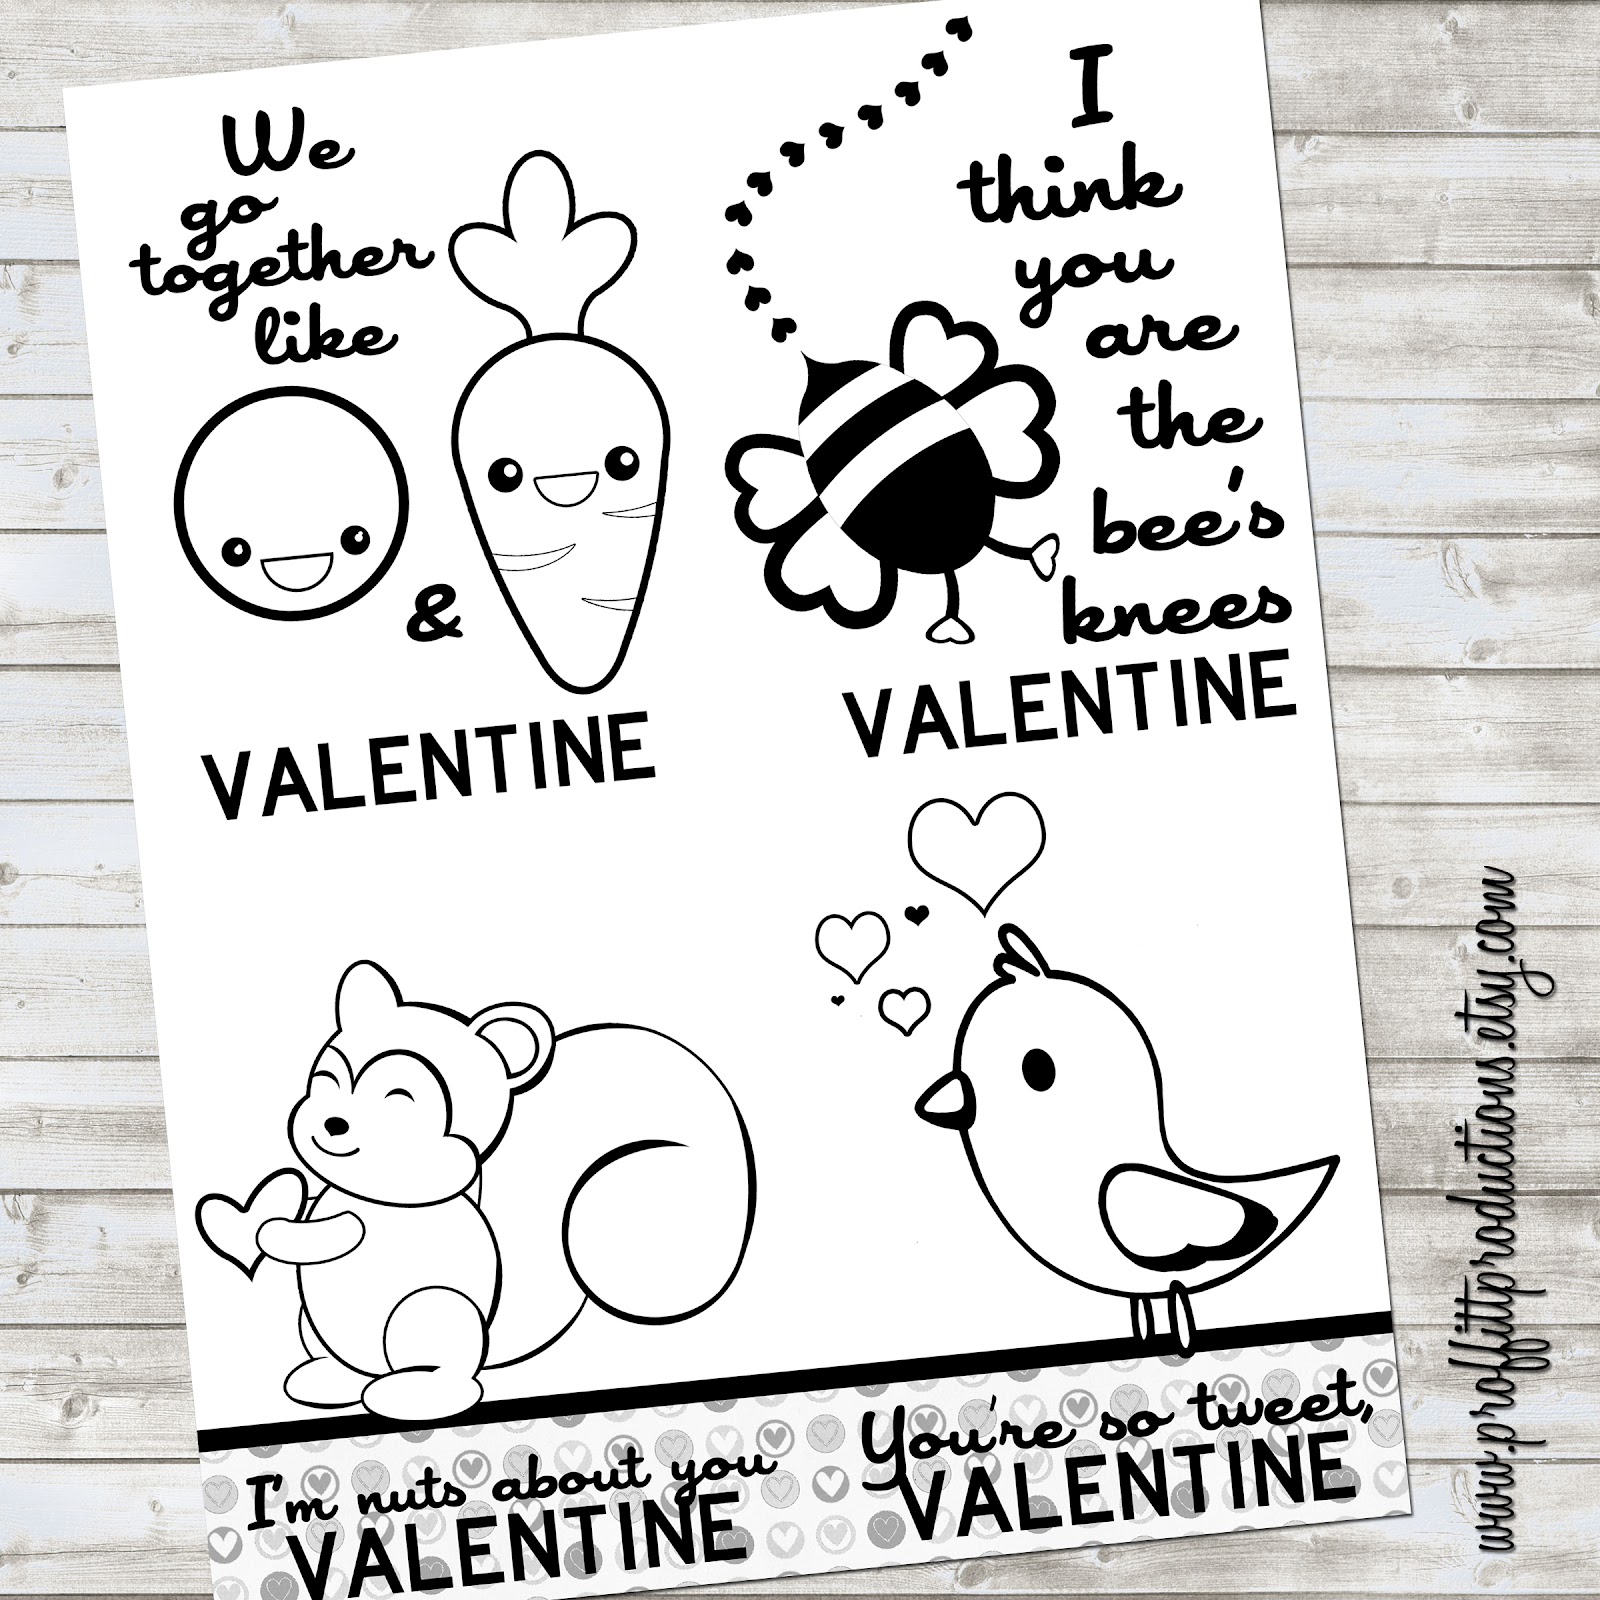 Funny Pictures Gallery: Valentines day sayings for kids, valentines day sayings